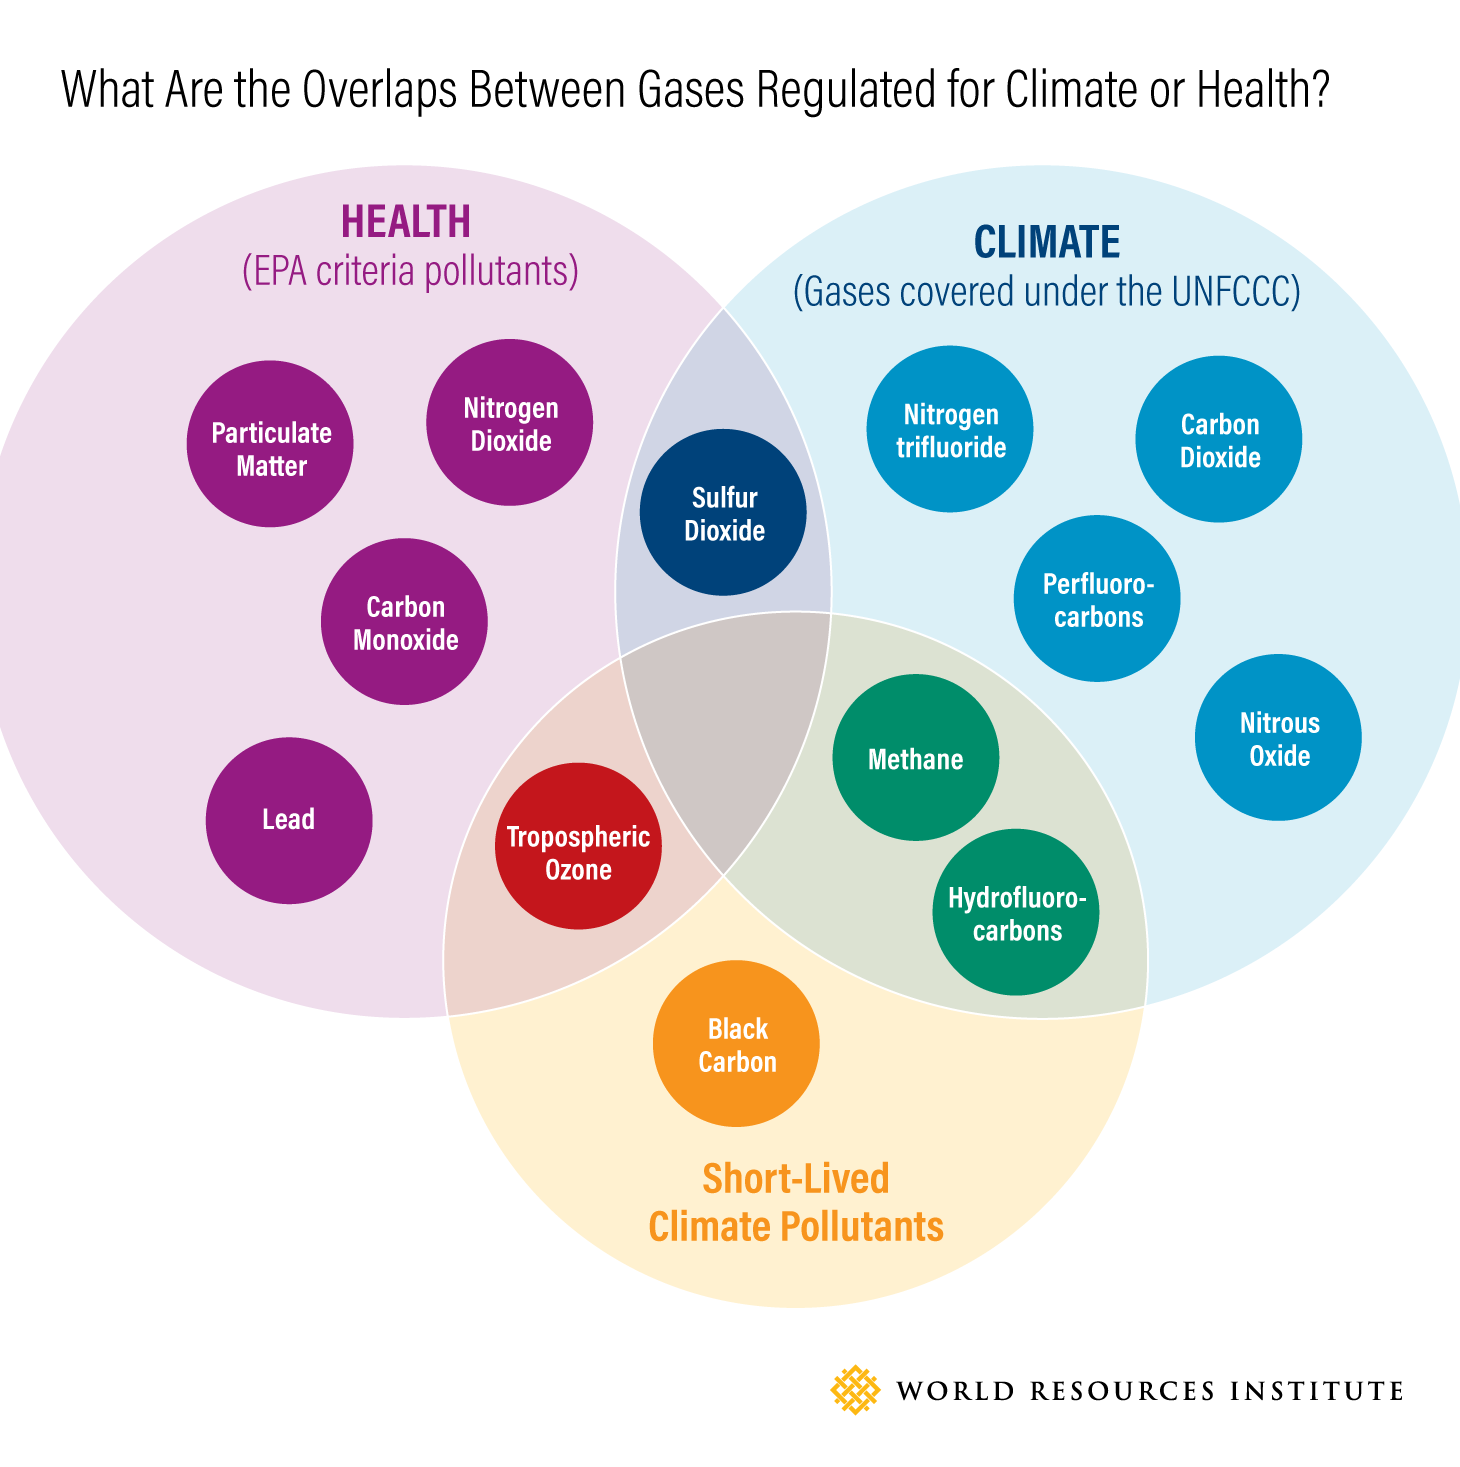 What Are the Overlaps Between Gases Regulated for Climate or Health?